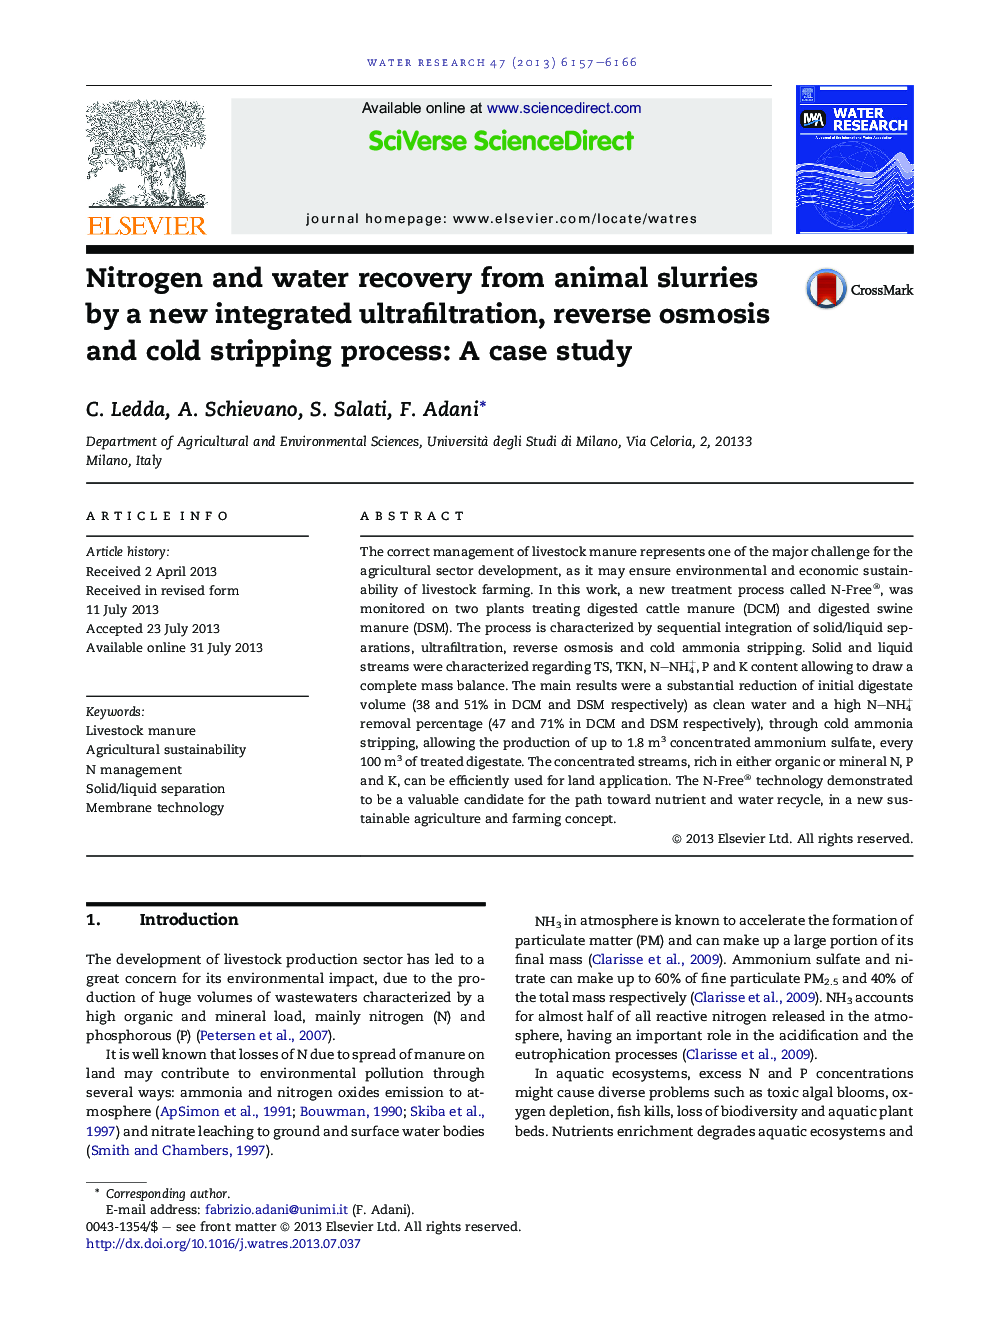 Nitrogen and water recovery from animal slurries by a new integrated ultrafiltration, reverse osmosis and cold stripping process: A case study